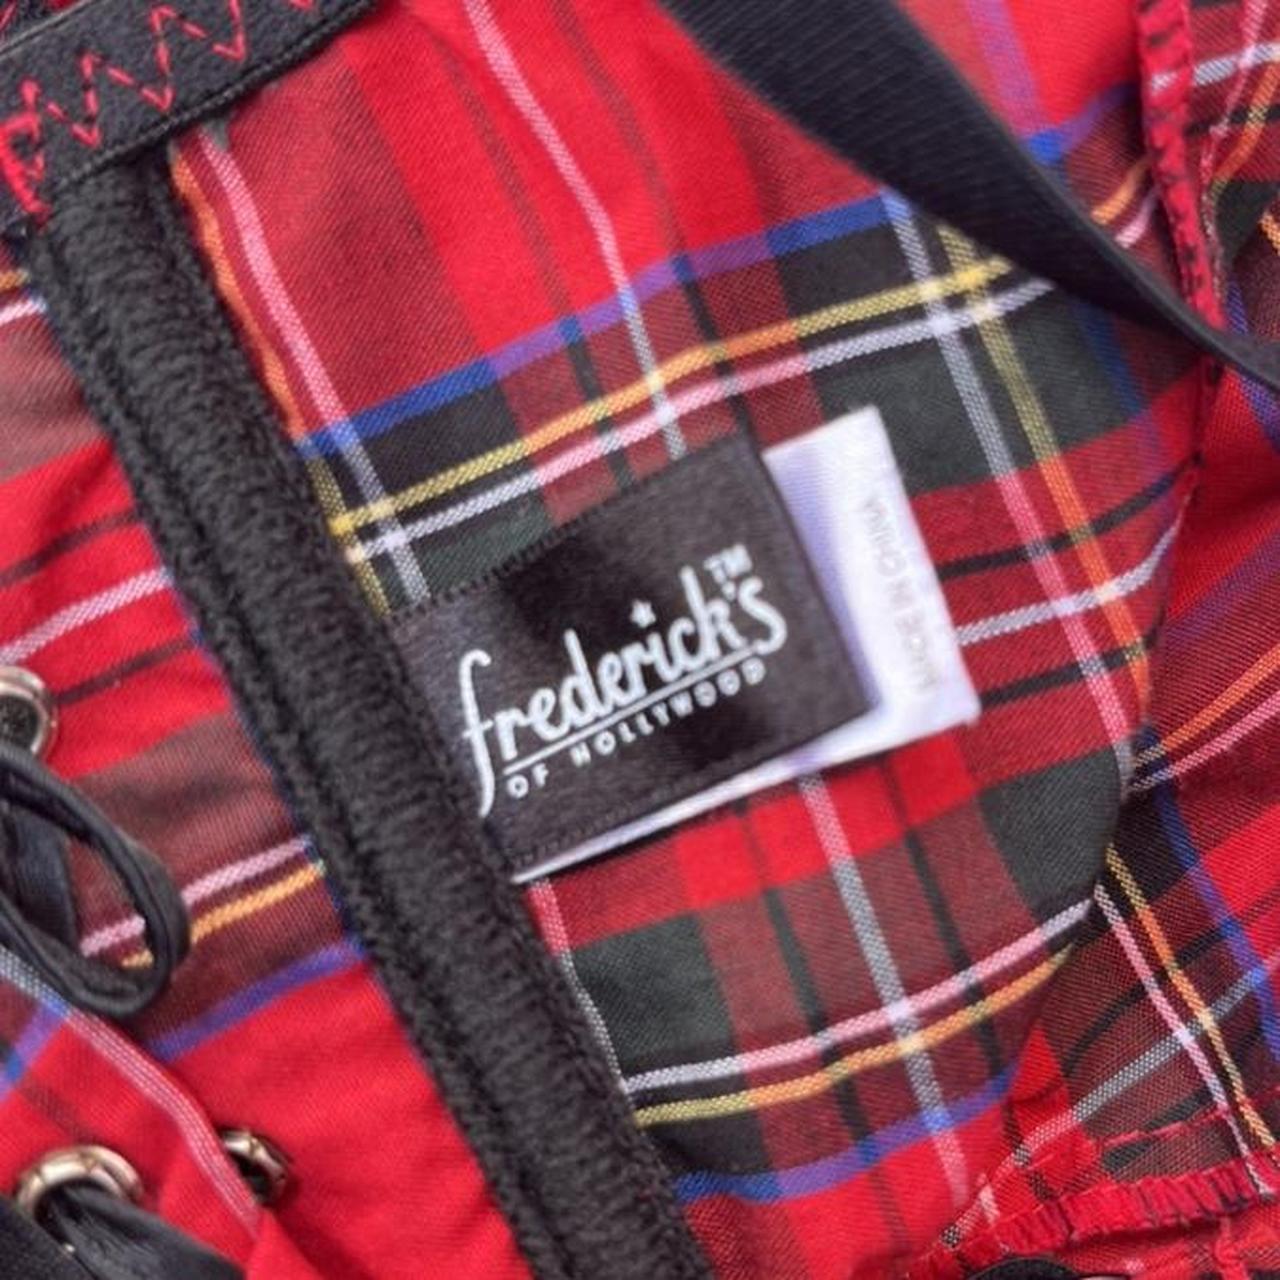 Product Image 2 - fredericks of hollywood corset
plaid red